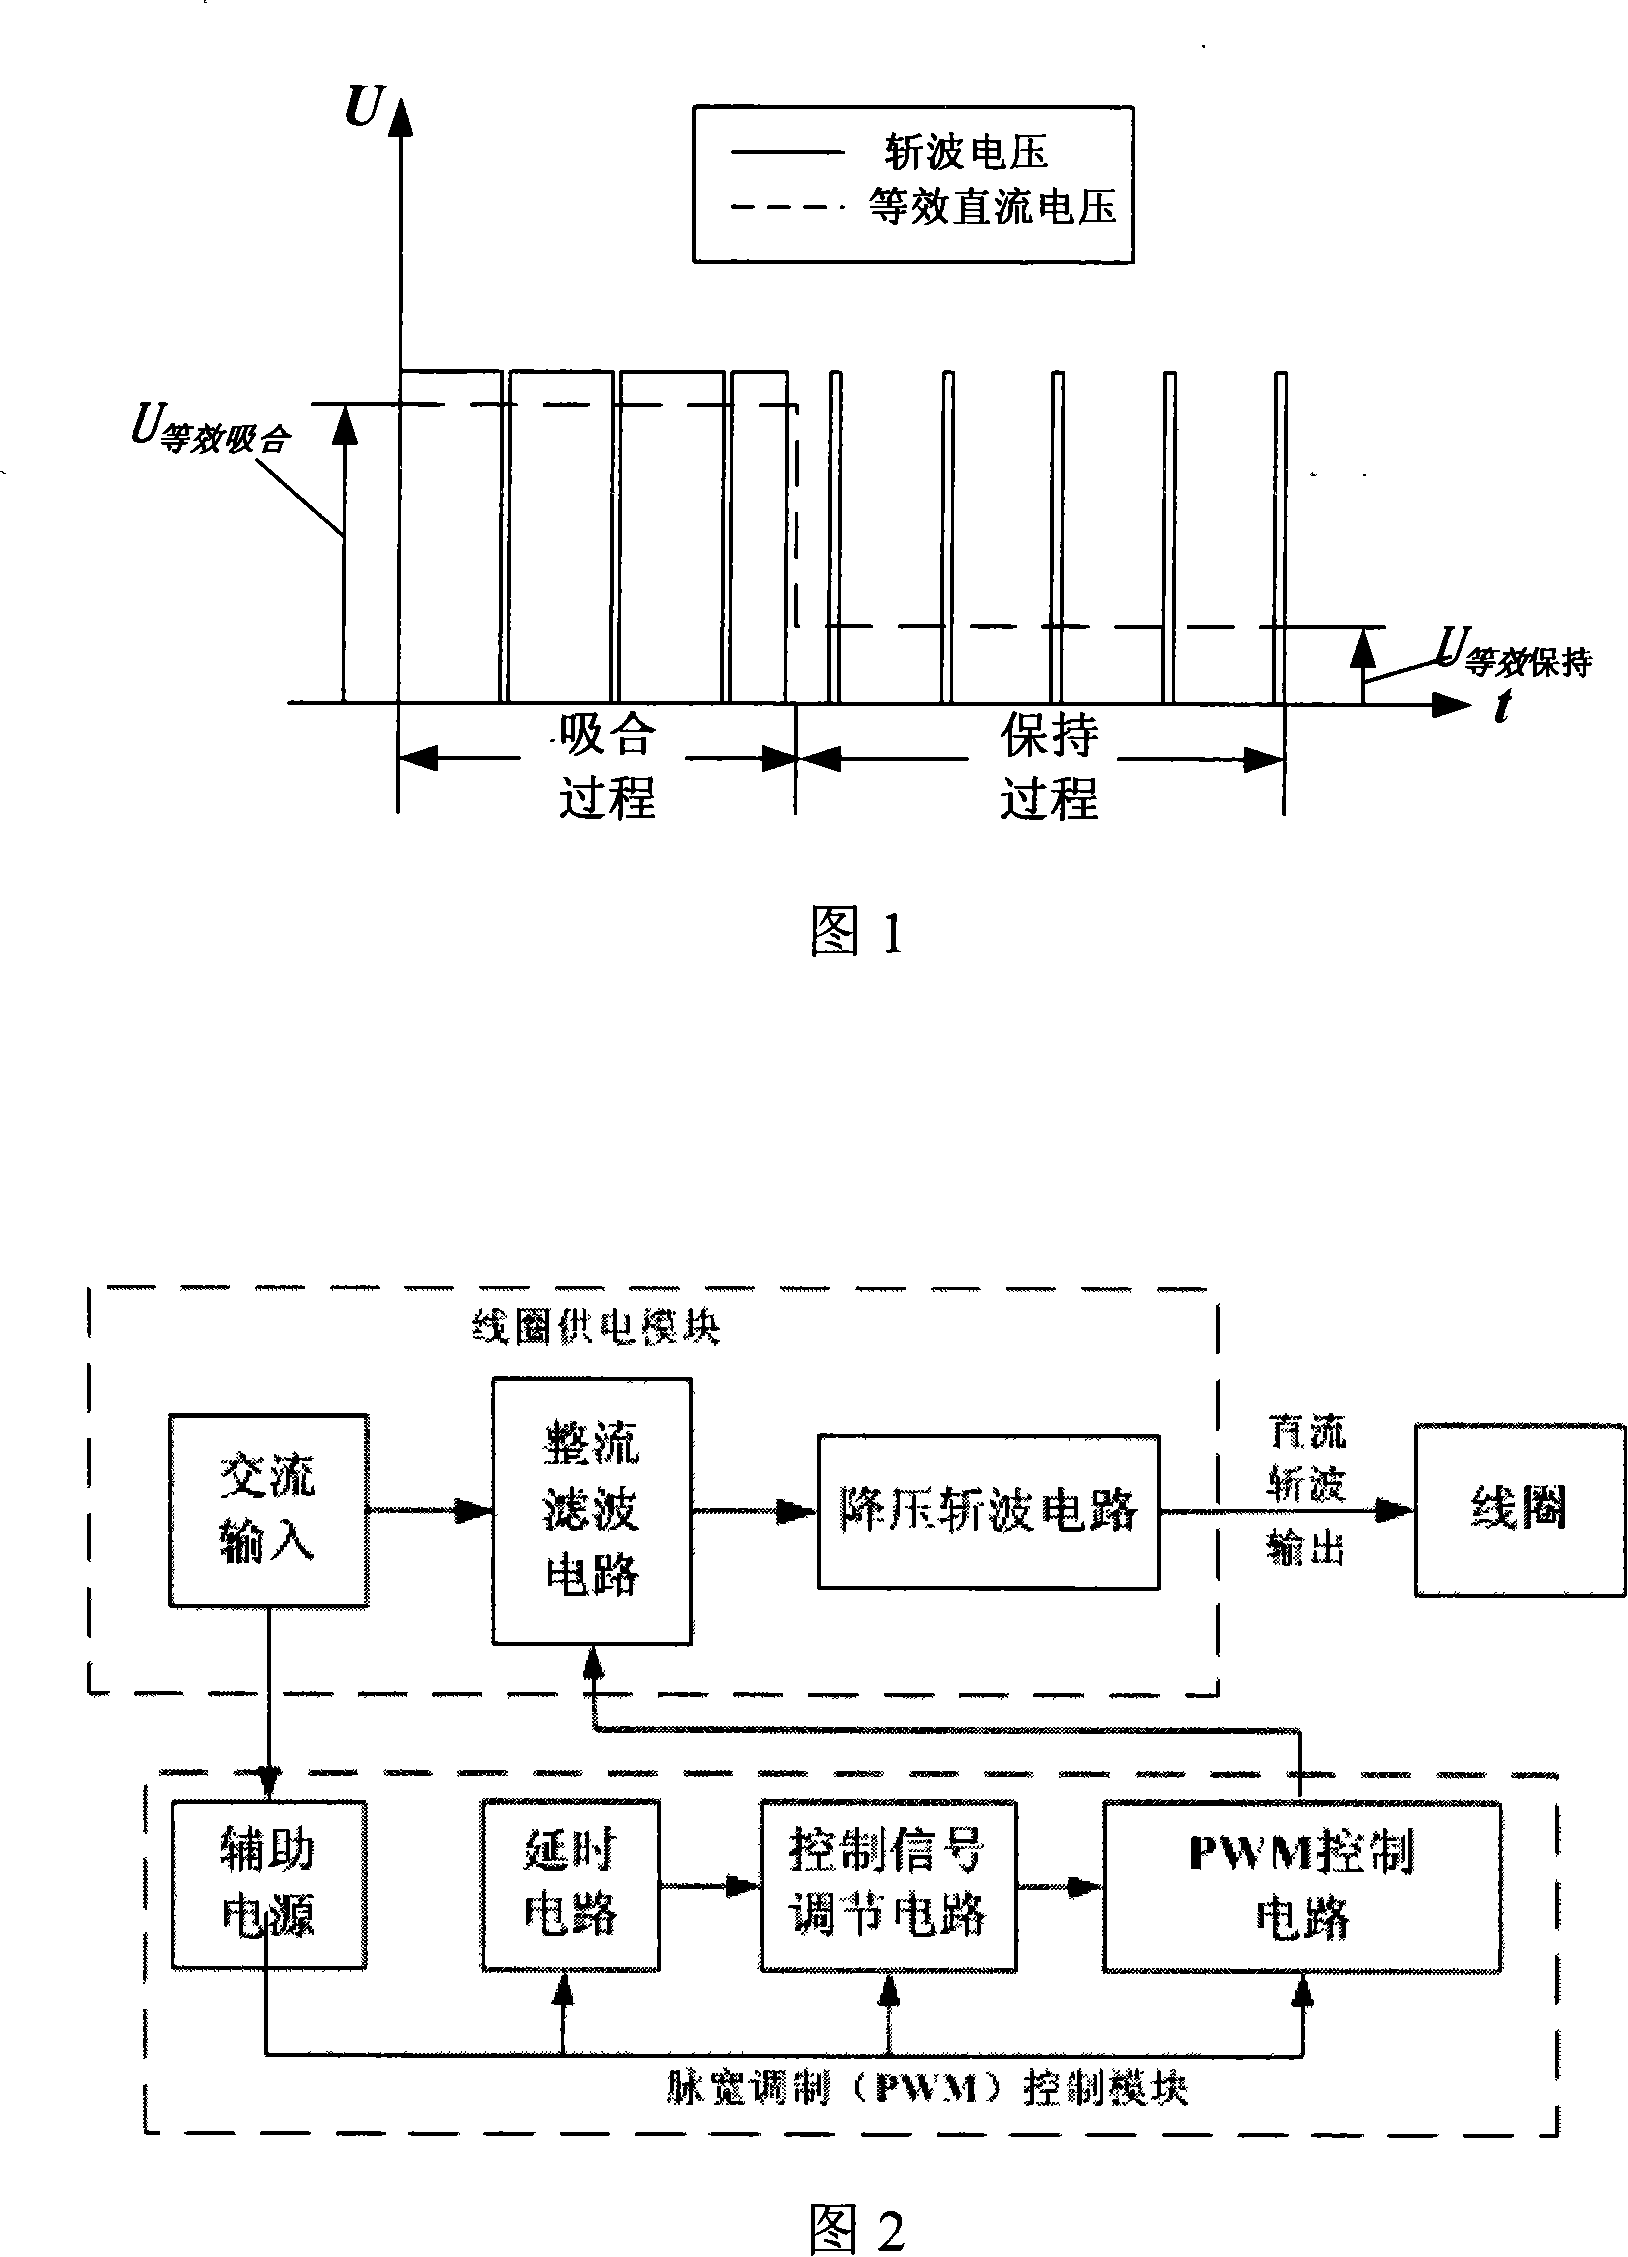 Permanent magnetic machine controller based on pulse modulation technology